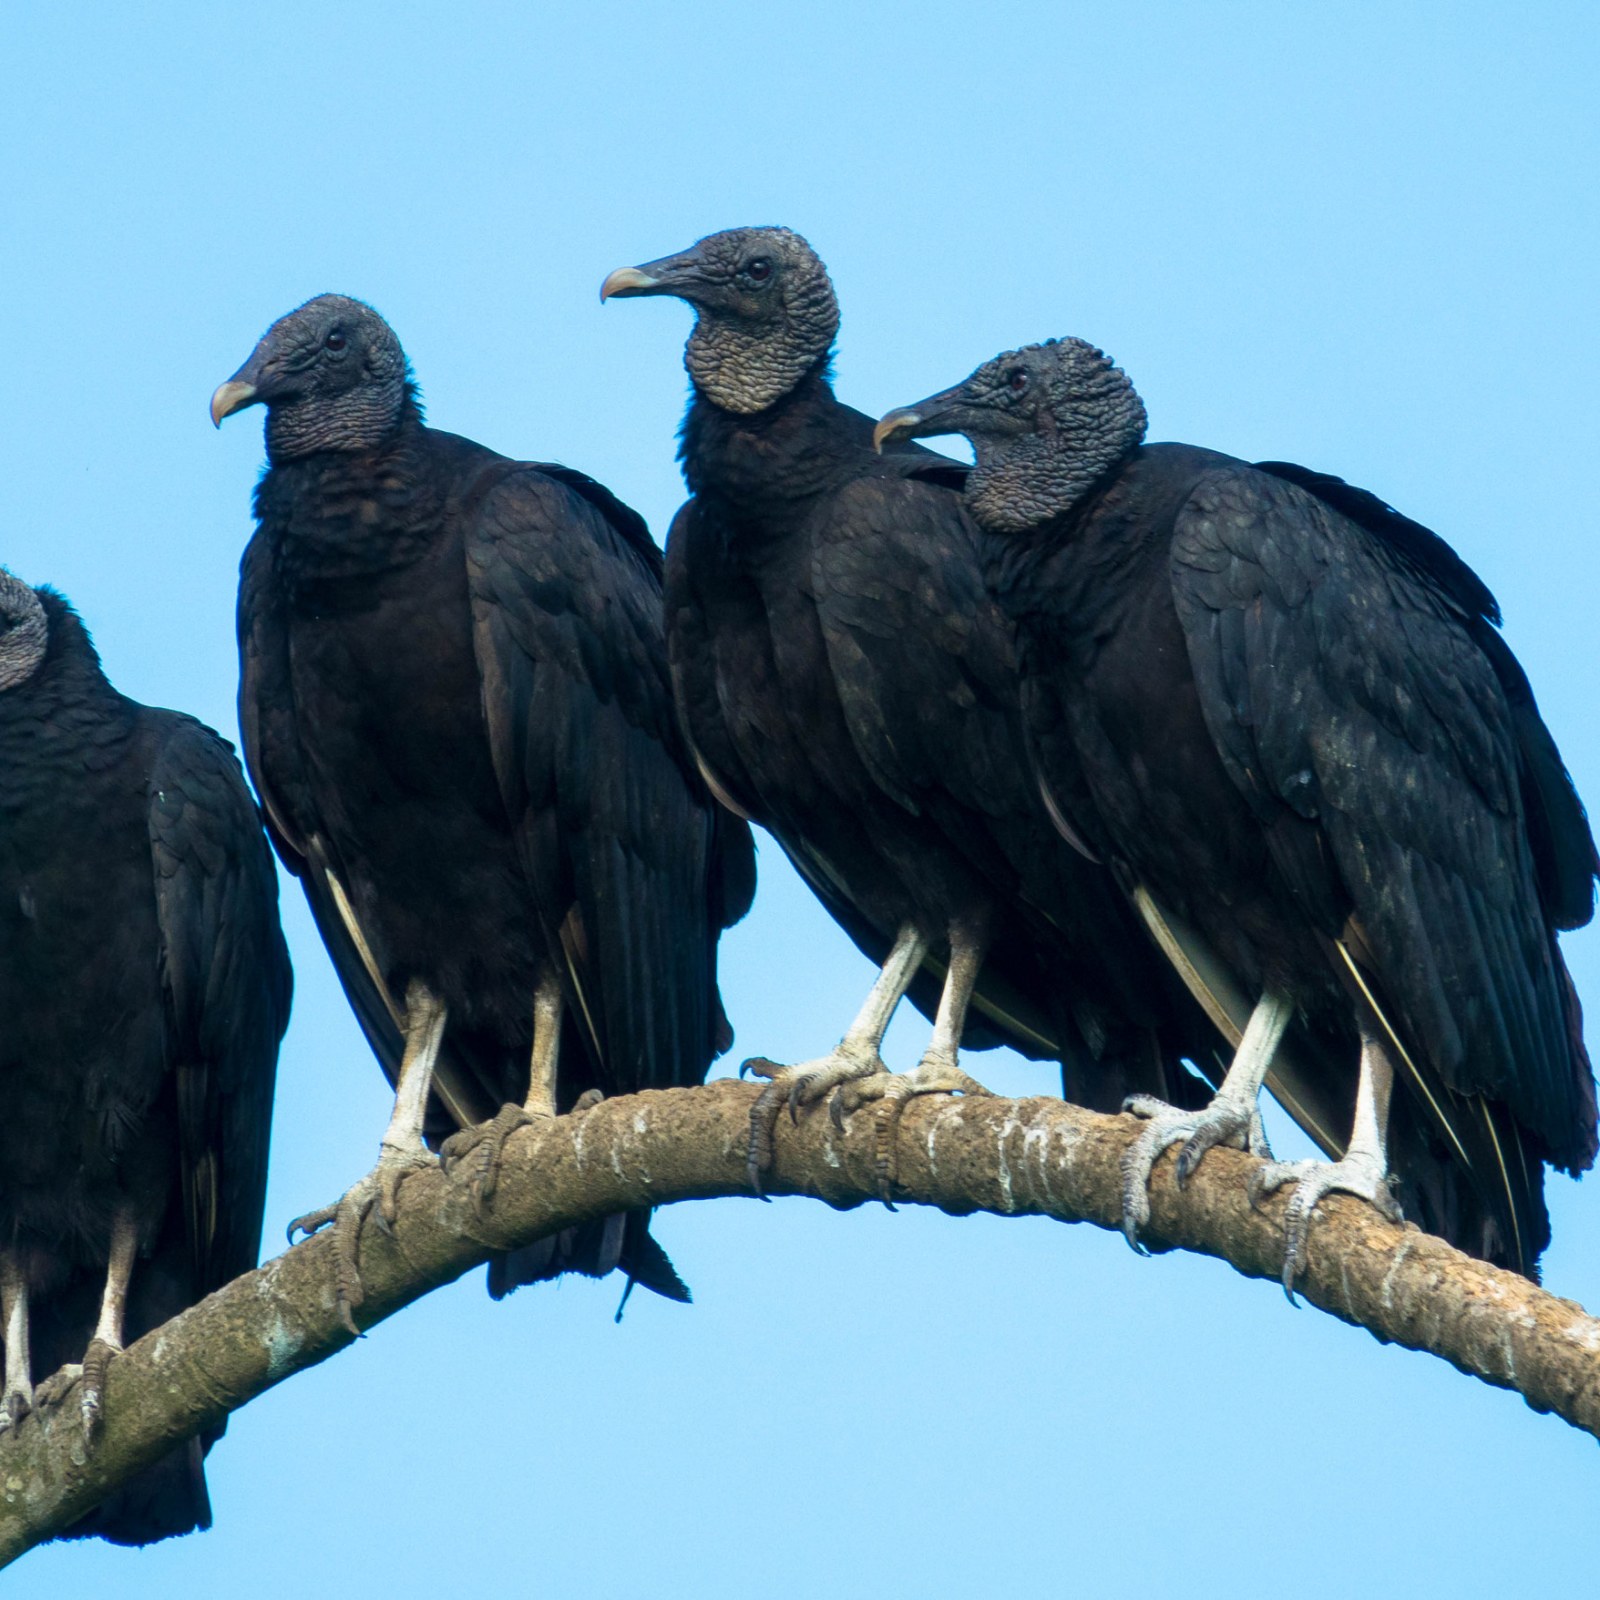 Massive Swarm of Black Vultures Seen Perched Upon Neighborhood Rooftops in  Ominous Viral Video